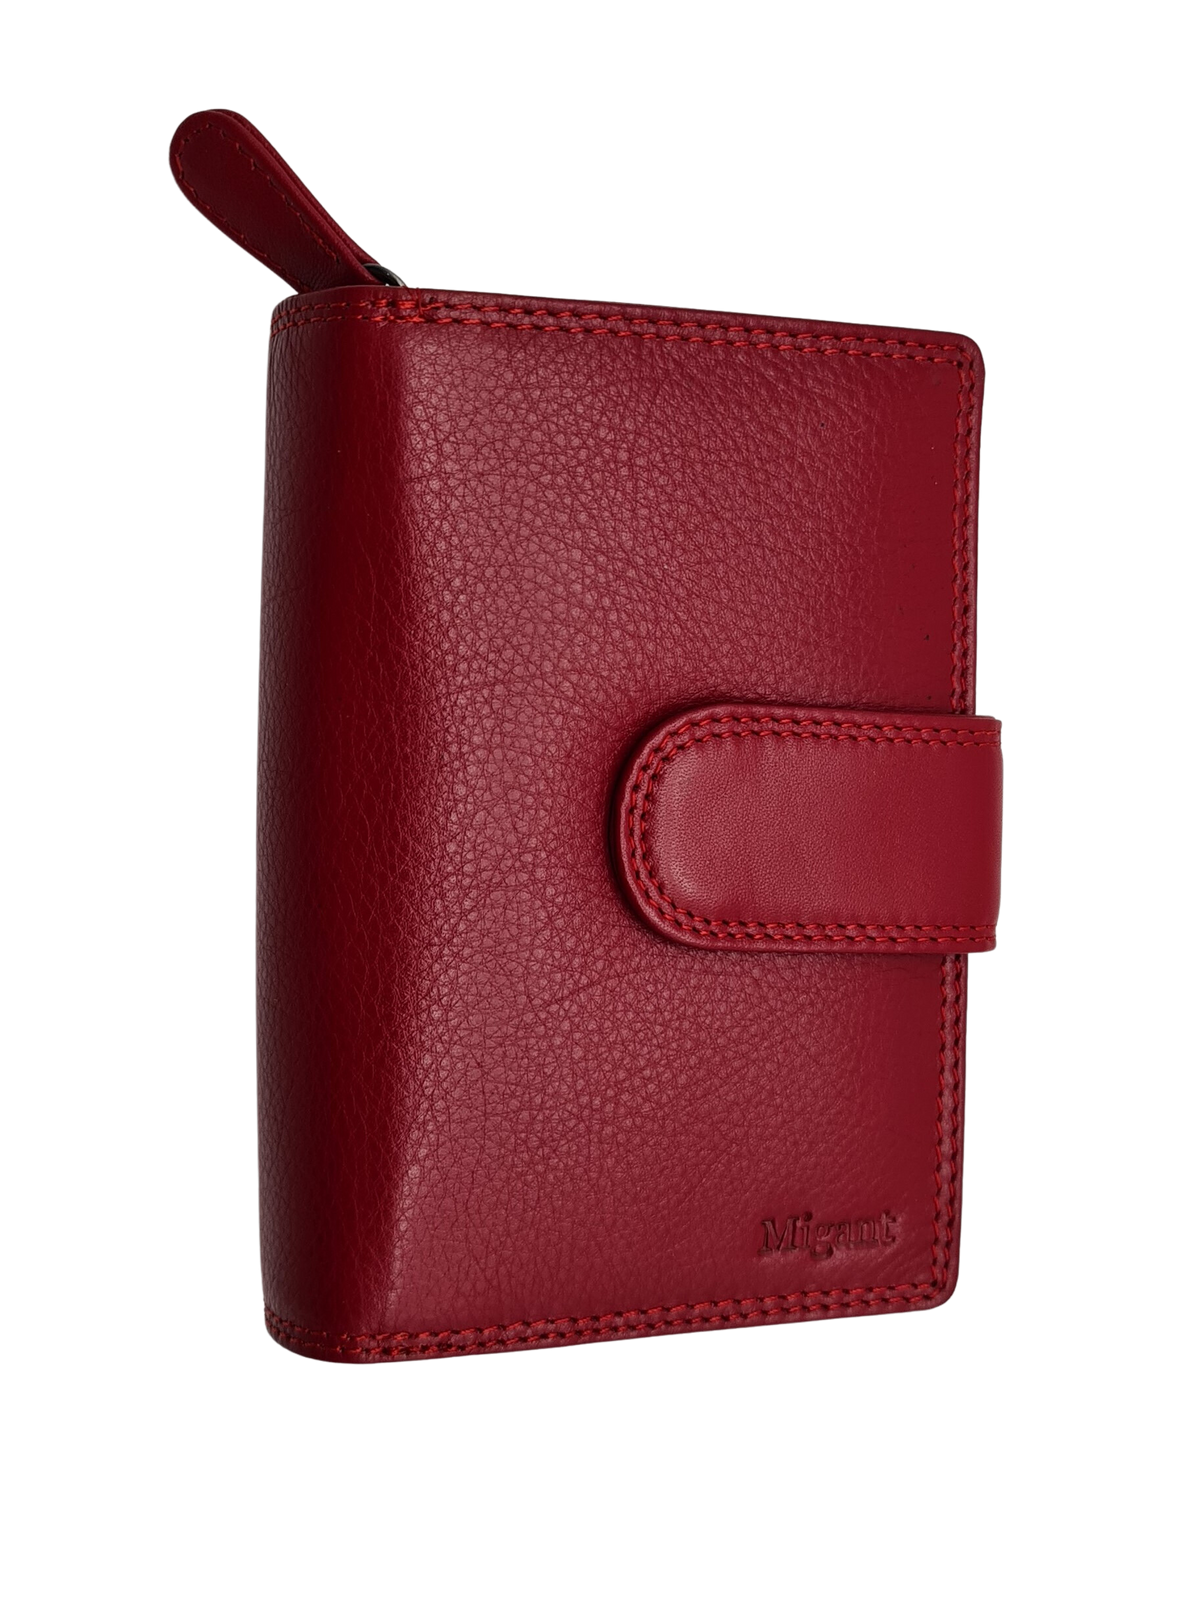 Migant Design Woman leather wallet colour with RFID protection 6081 - Migant